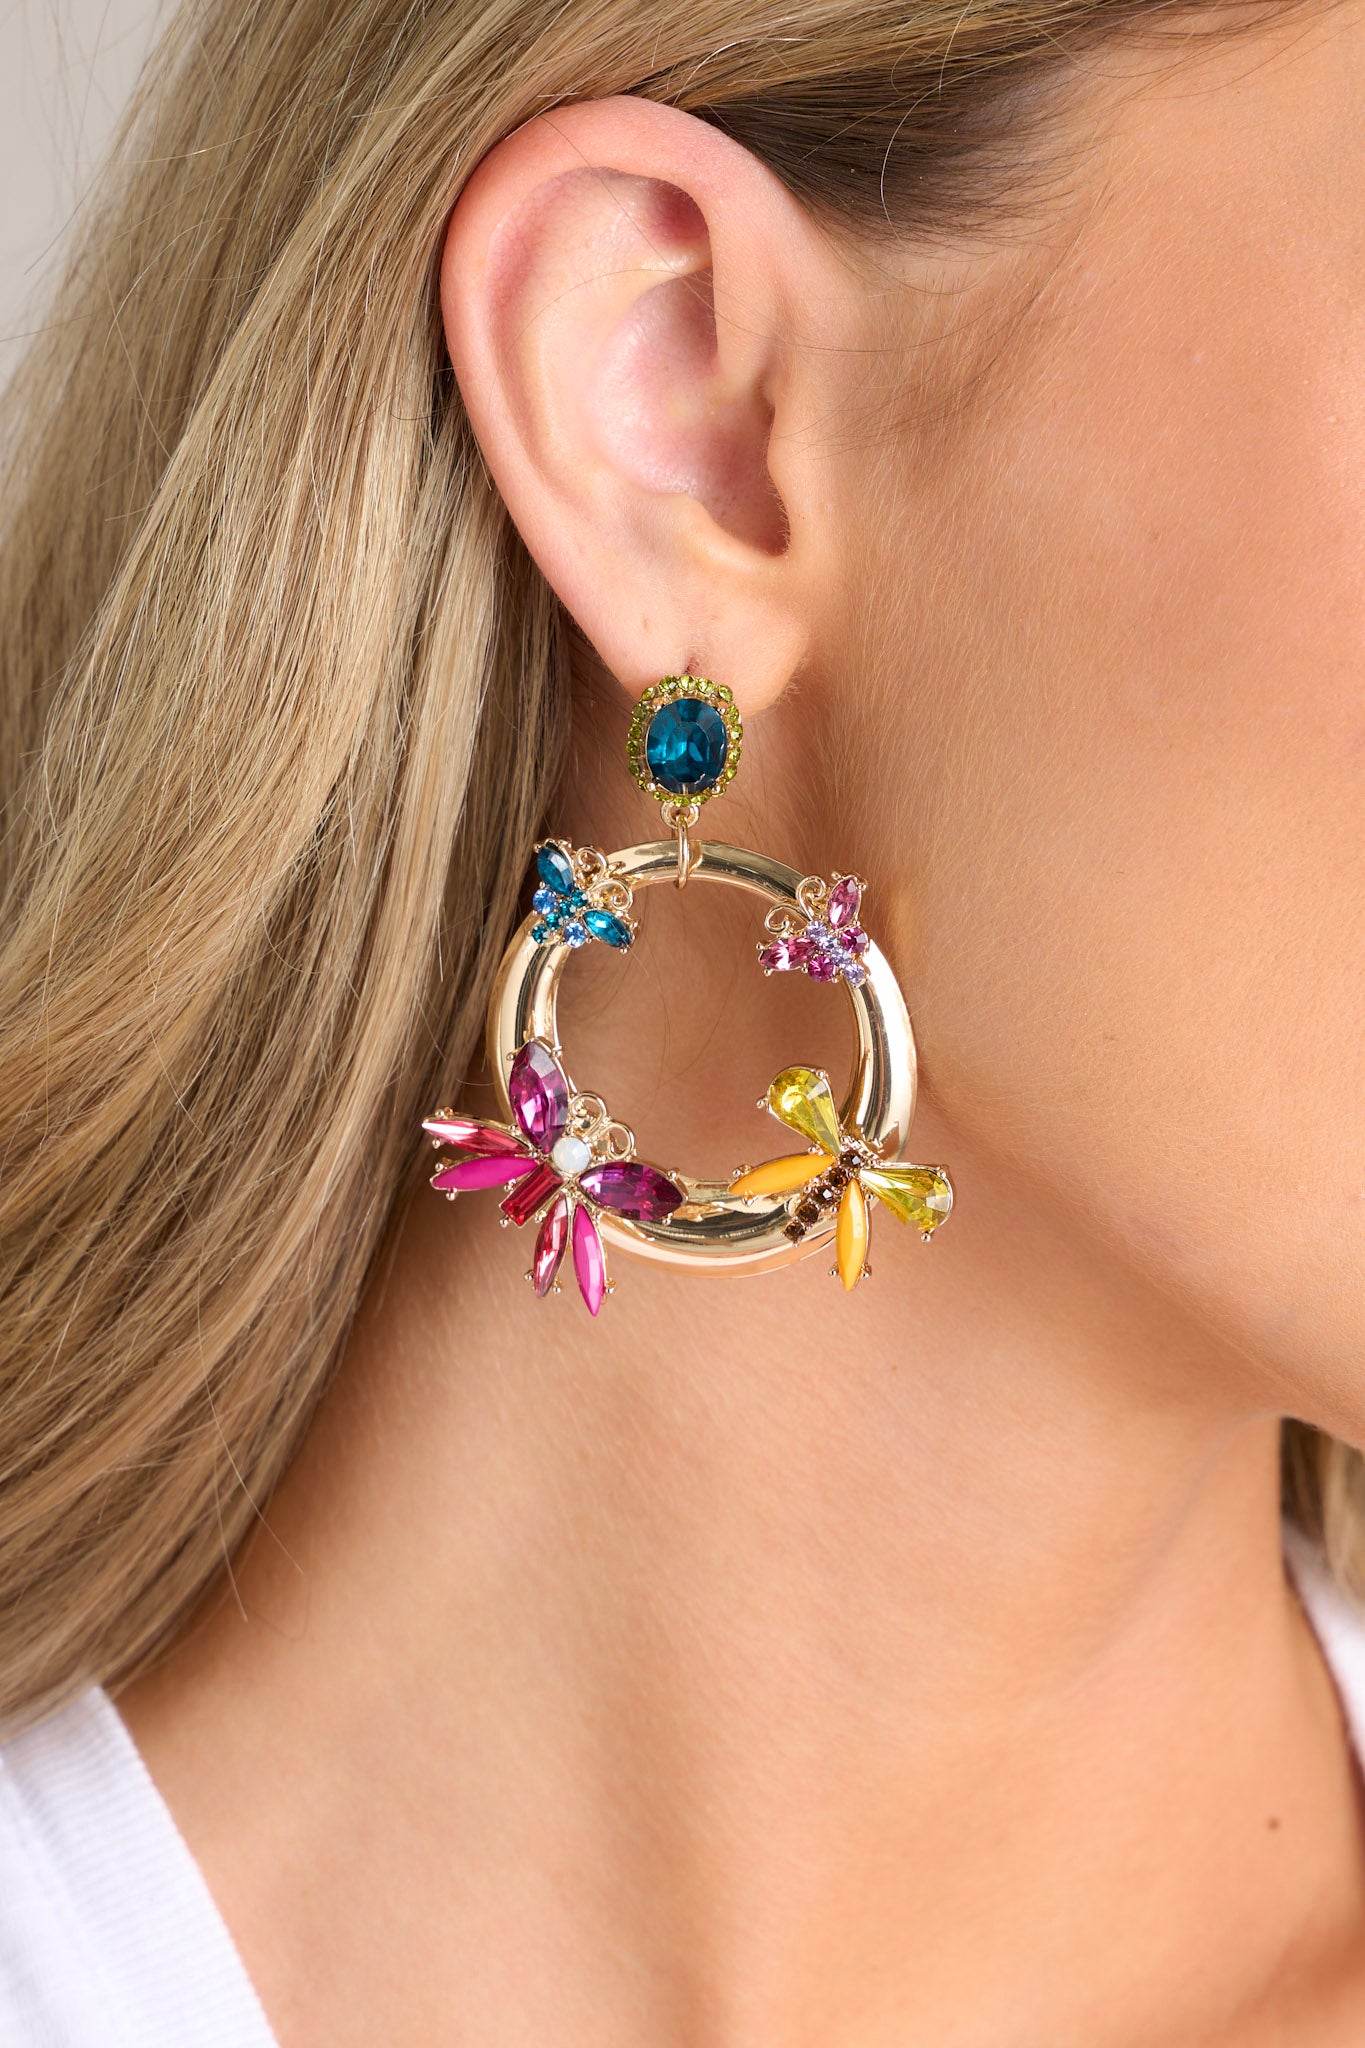 Close up view of these earrings that feature gold hardware, a rhinestone stud connected to a hoop design, colored butterfly shaped rhinestone details, and secure post backings.